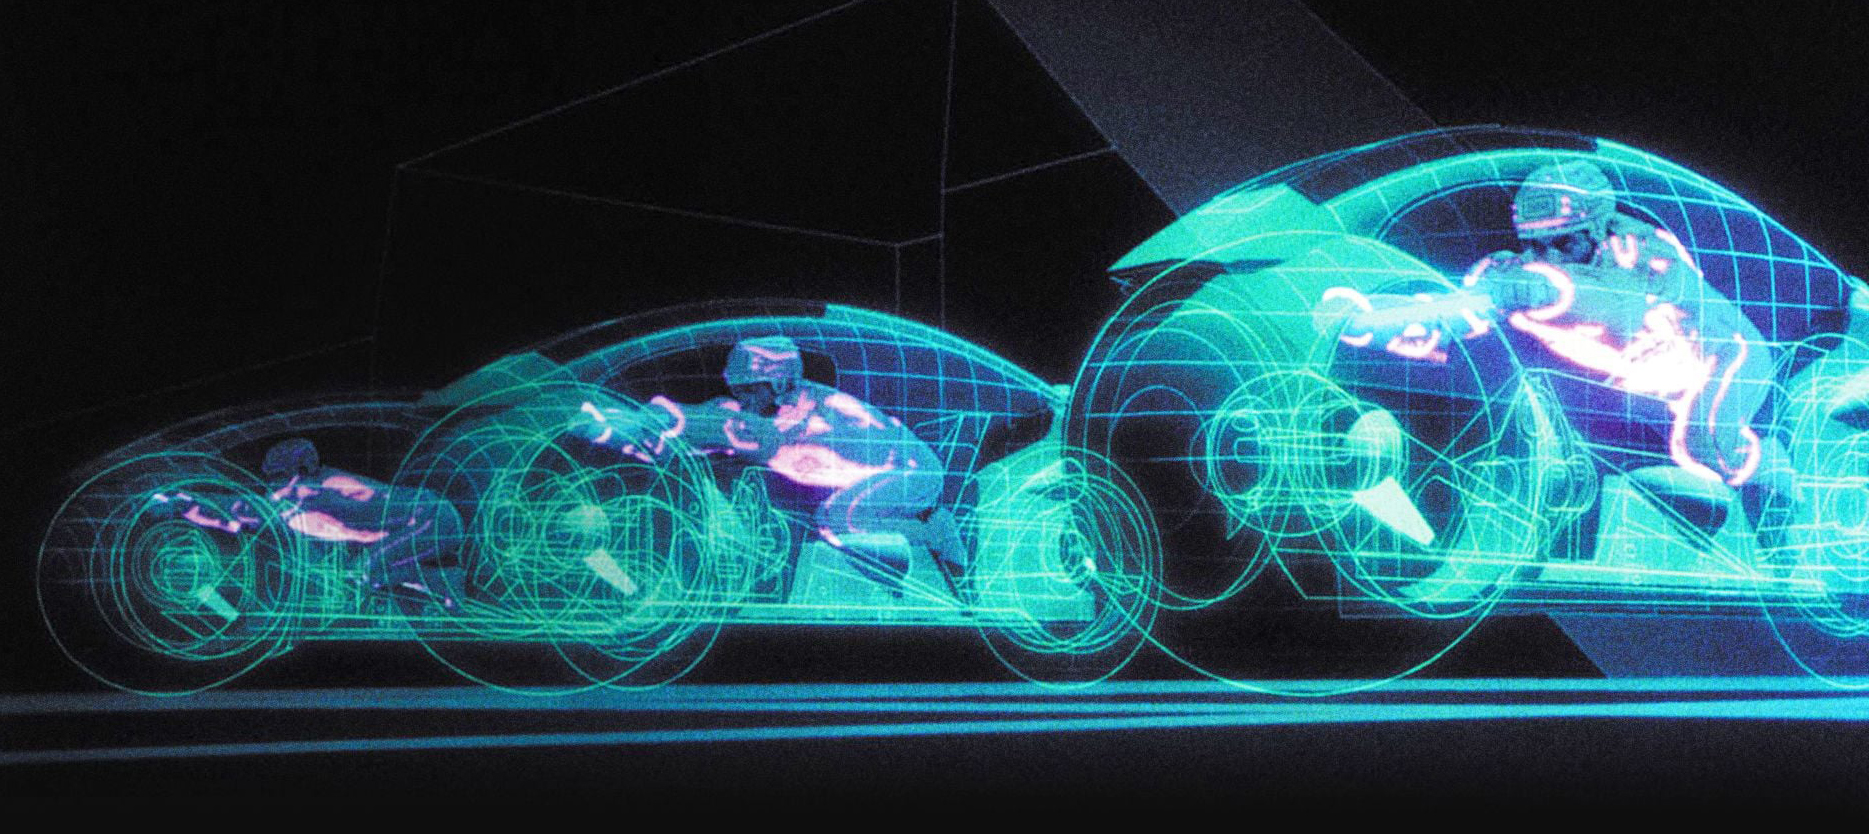 Tron 1982 Featured